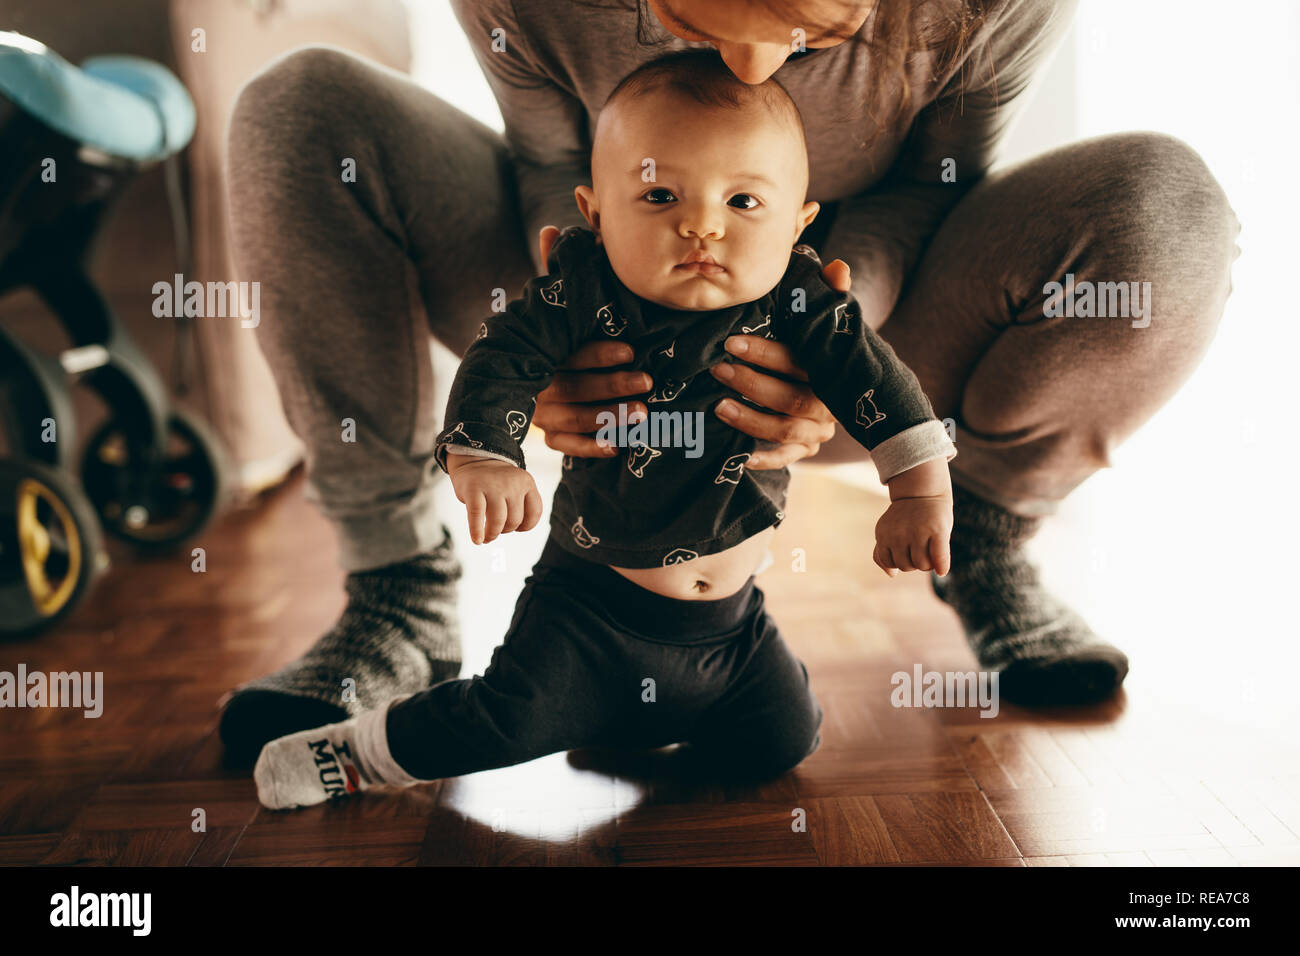 Close up of a mother playing with her son at home. Woman squatting and holding her baby from behind at home. Stock Photo